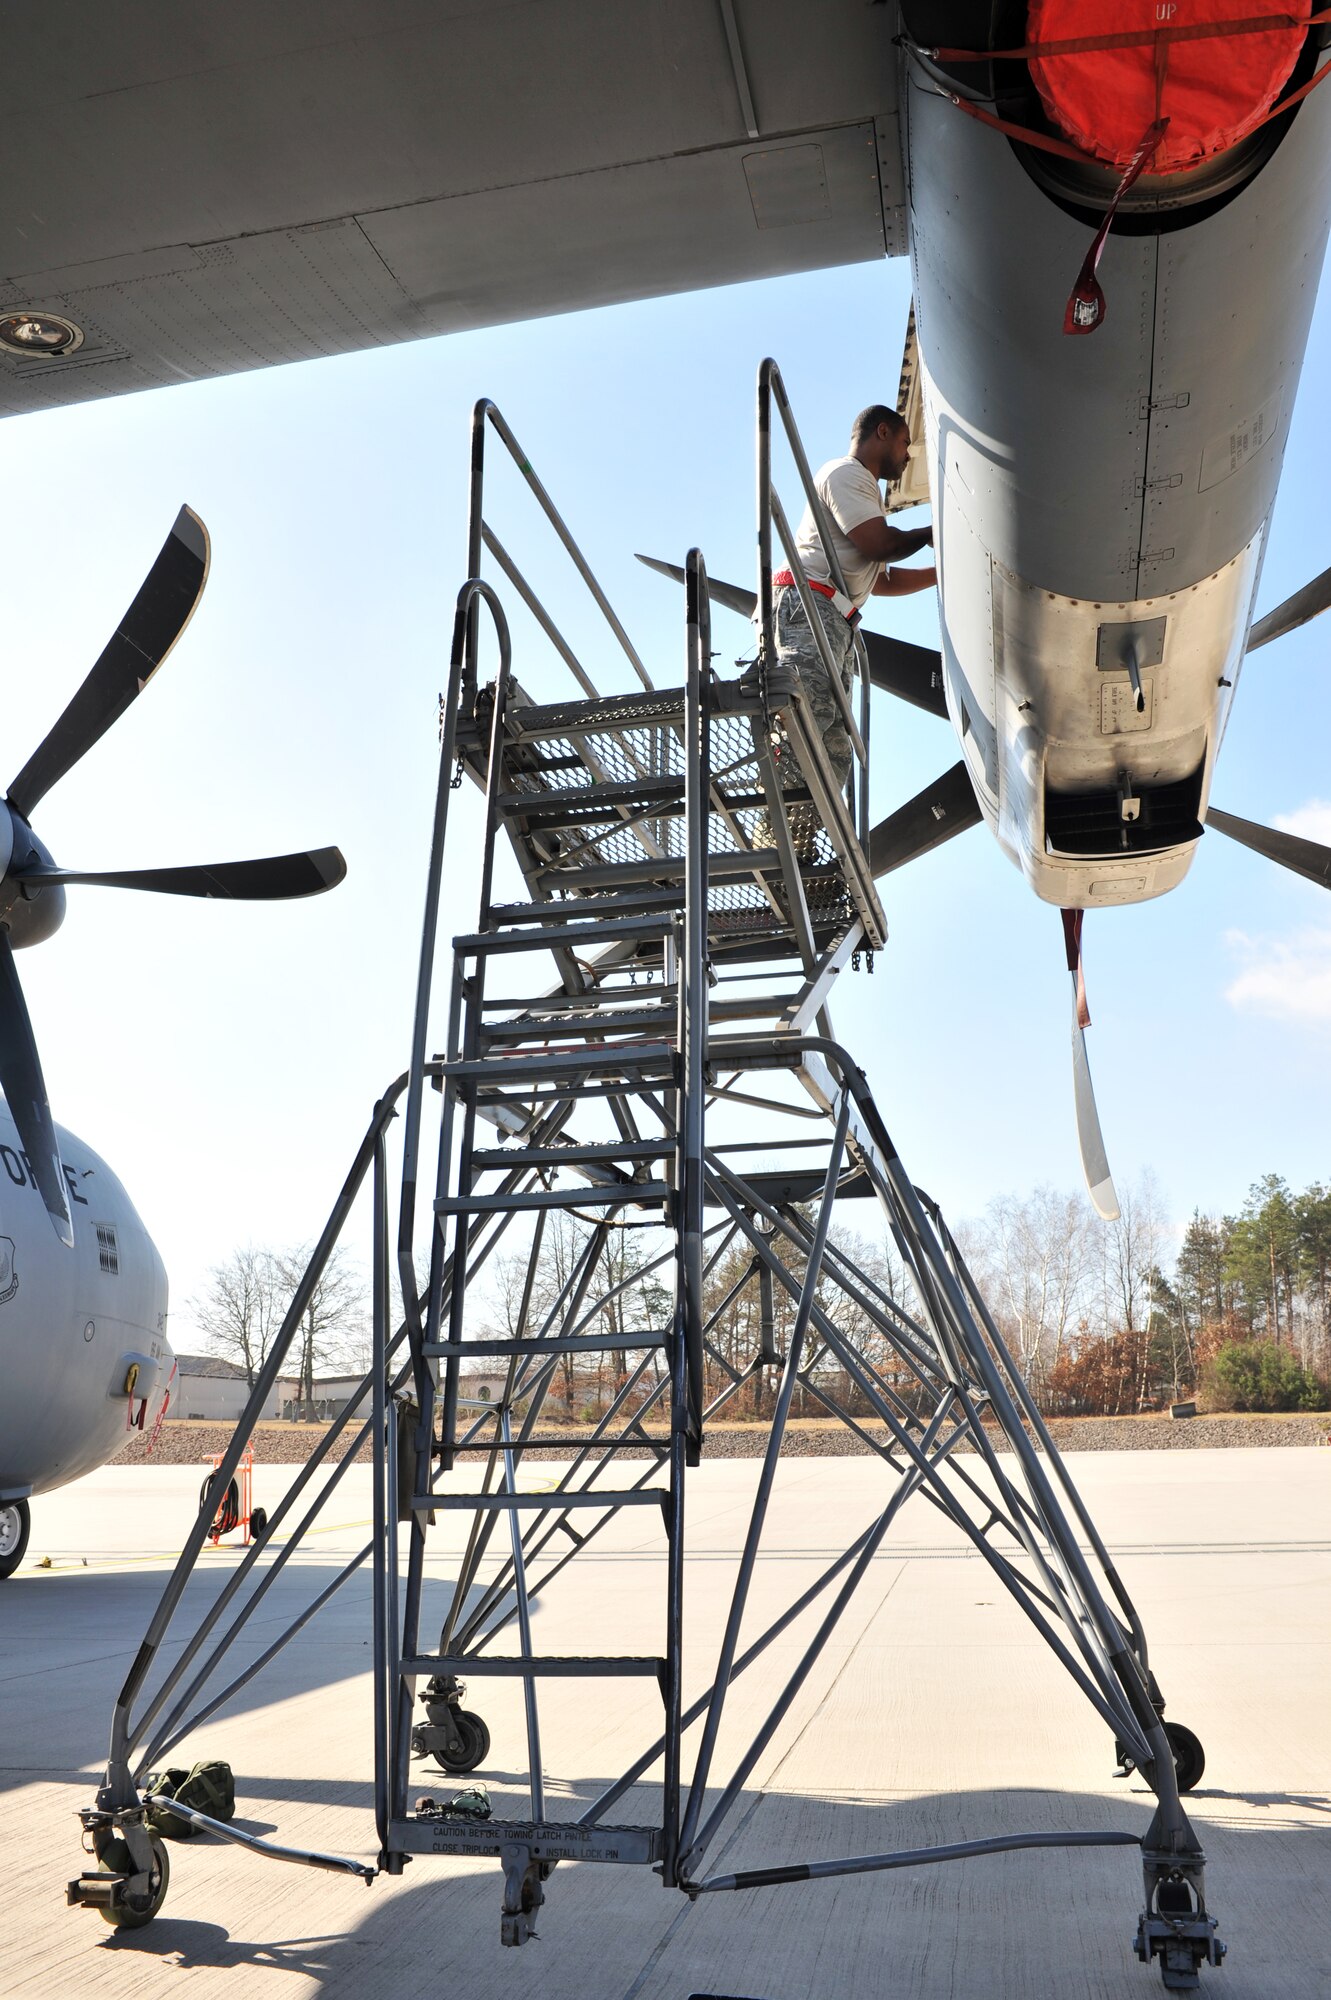 Air Force Staff Sgt. Redus Reed, 86th Maintenance Squadron maintainers, performs engine maintenance on a C-130J Super Hercules, Ramstein Air Base, Germany, March 12, 2012. The 86th MXS Airmen work jointly with the 86th Aircraft Maintenance Squadron to ensure all assigned aircraft are 100 percent ready for take off. (U.S. Air Force photo/Airman 1st Class Caitlin O'Neil-McKeown)